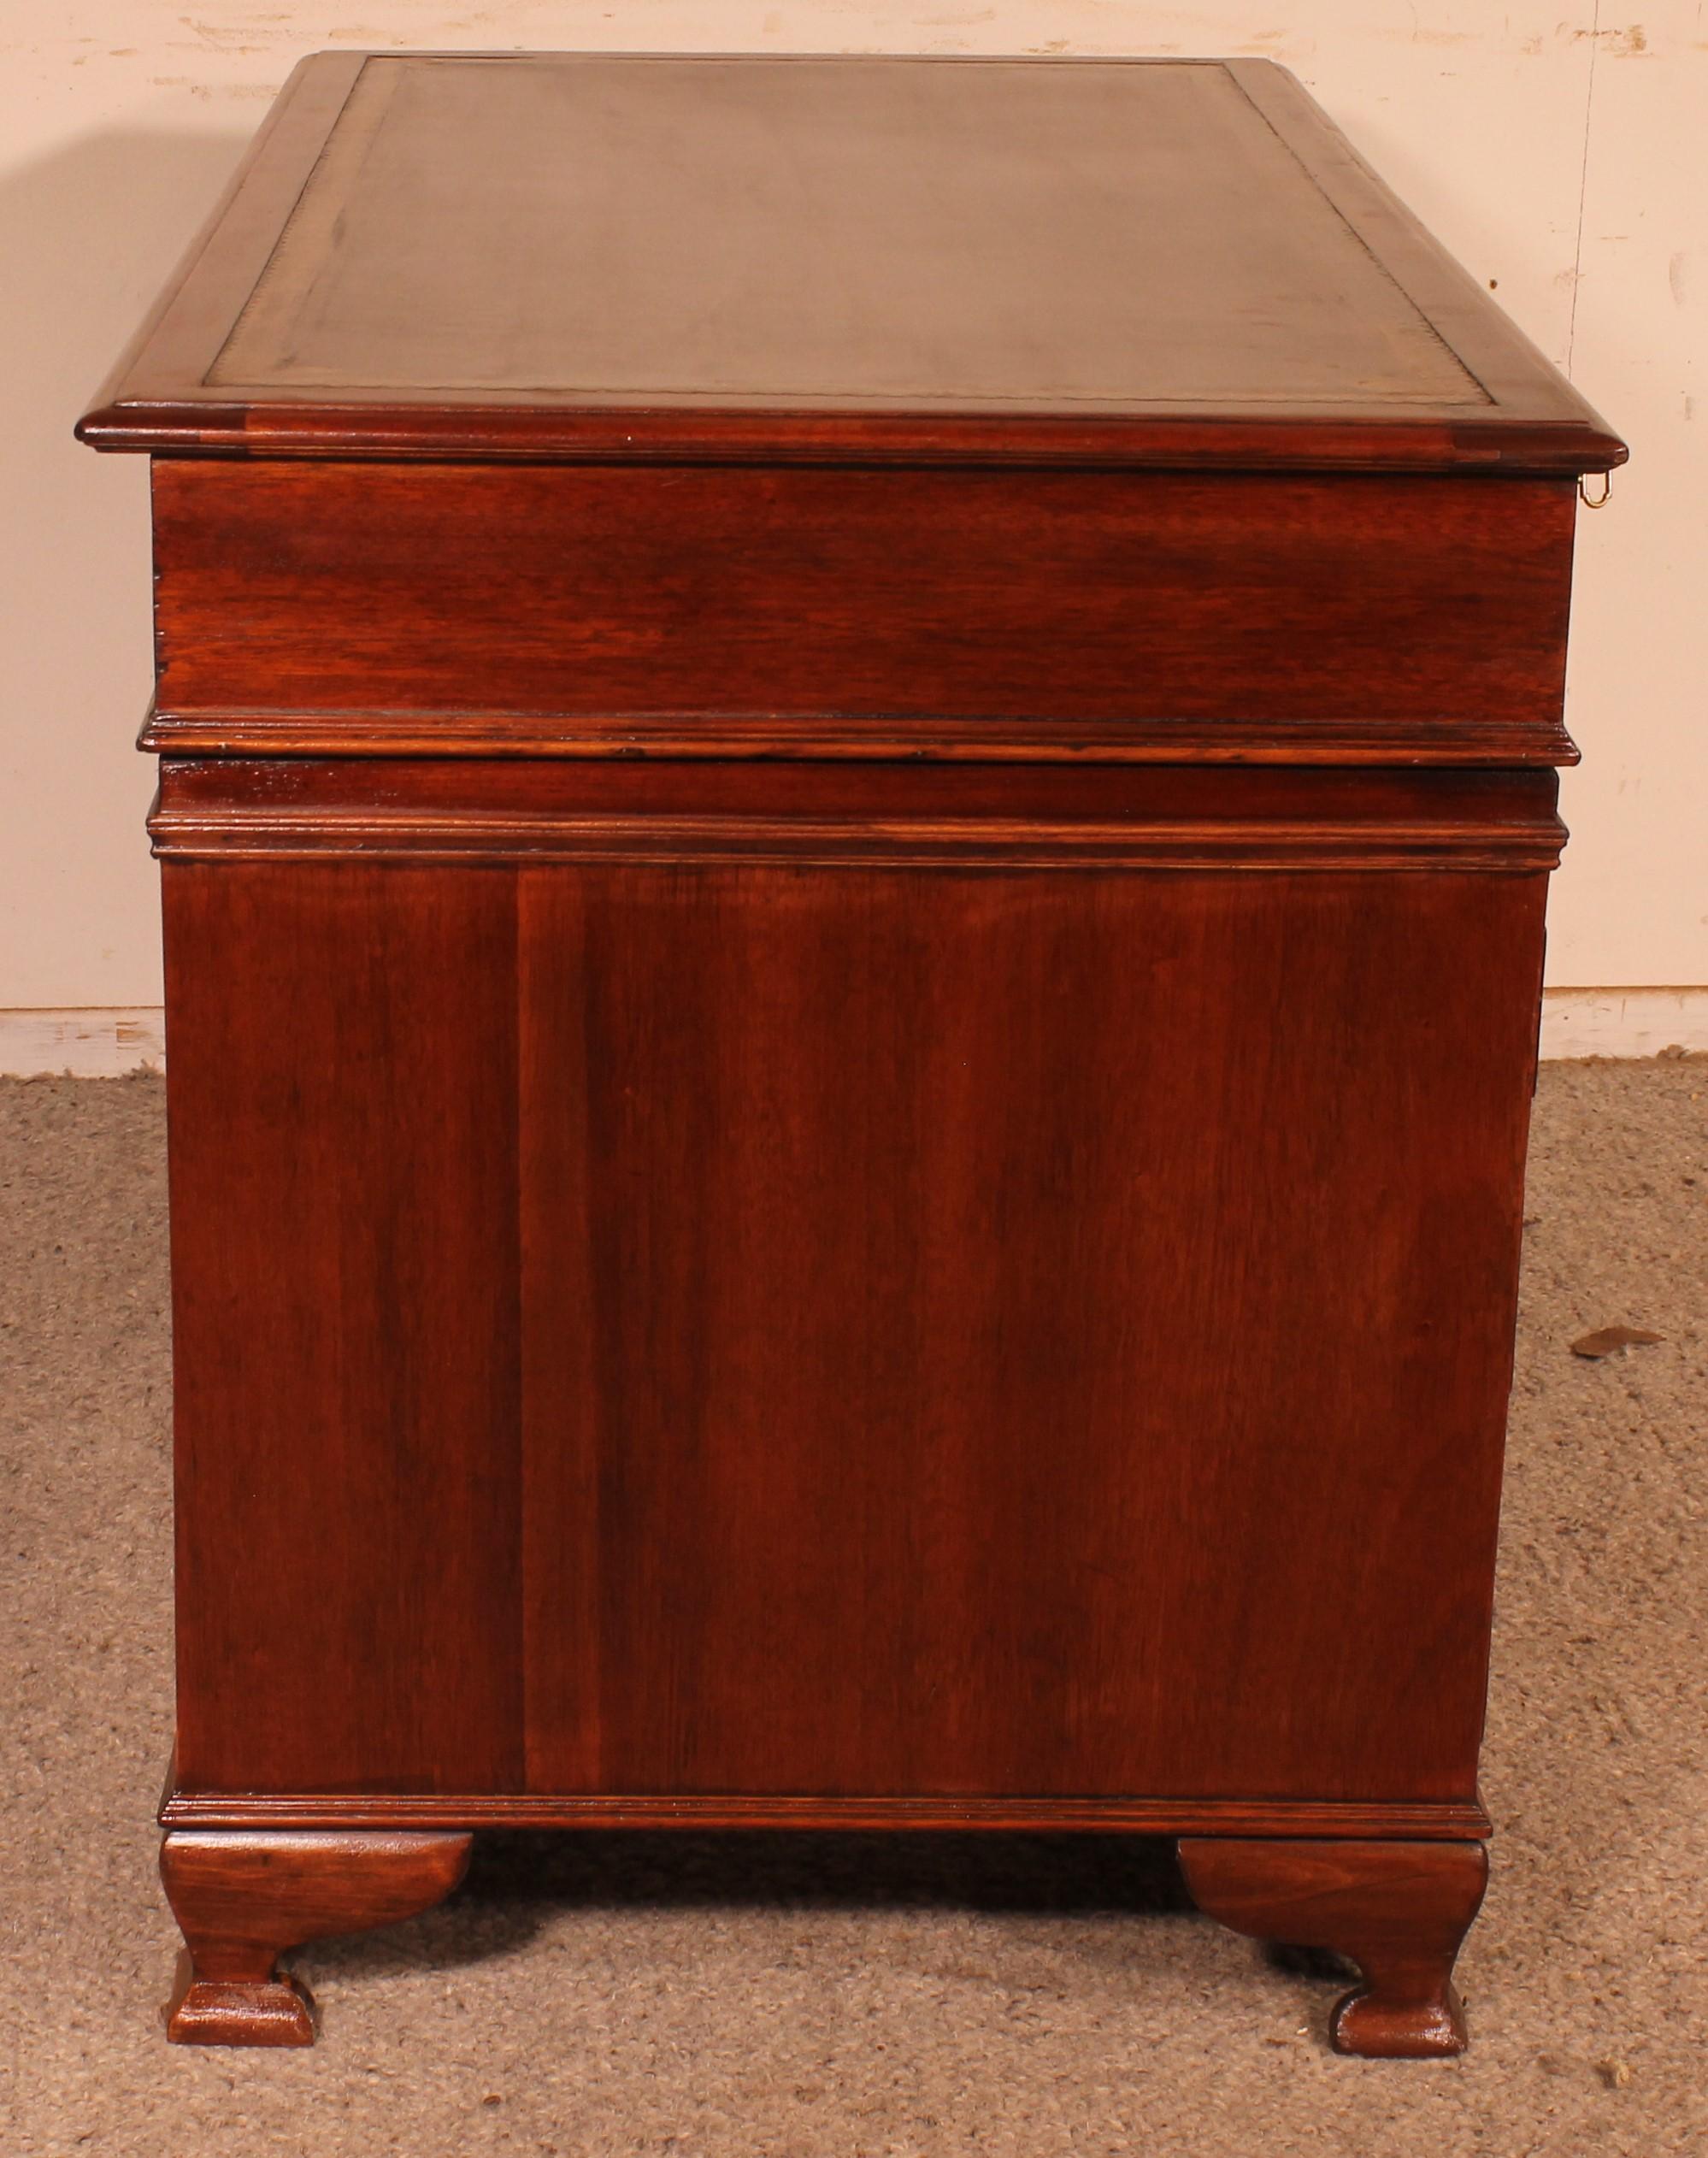 Small Mahogany Pedestal Desk From The 19 ° Century For Sale 1